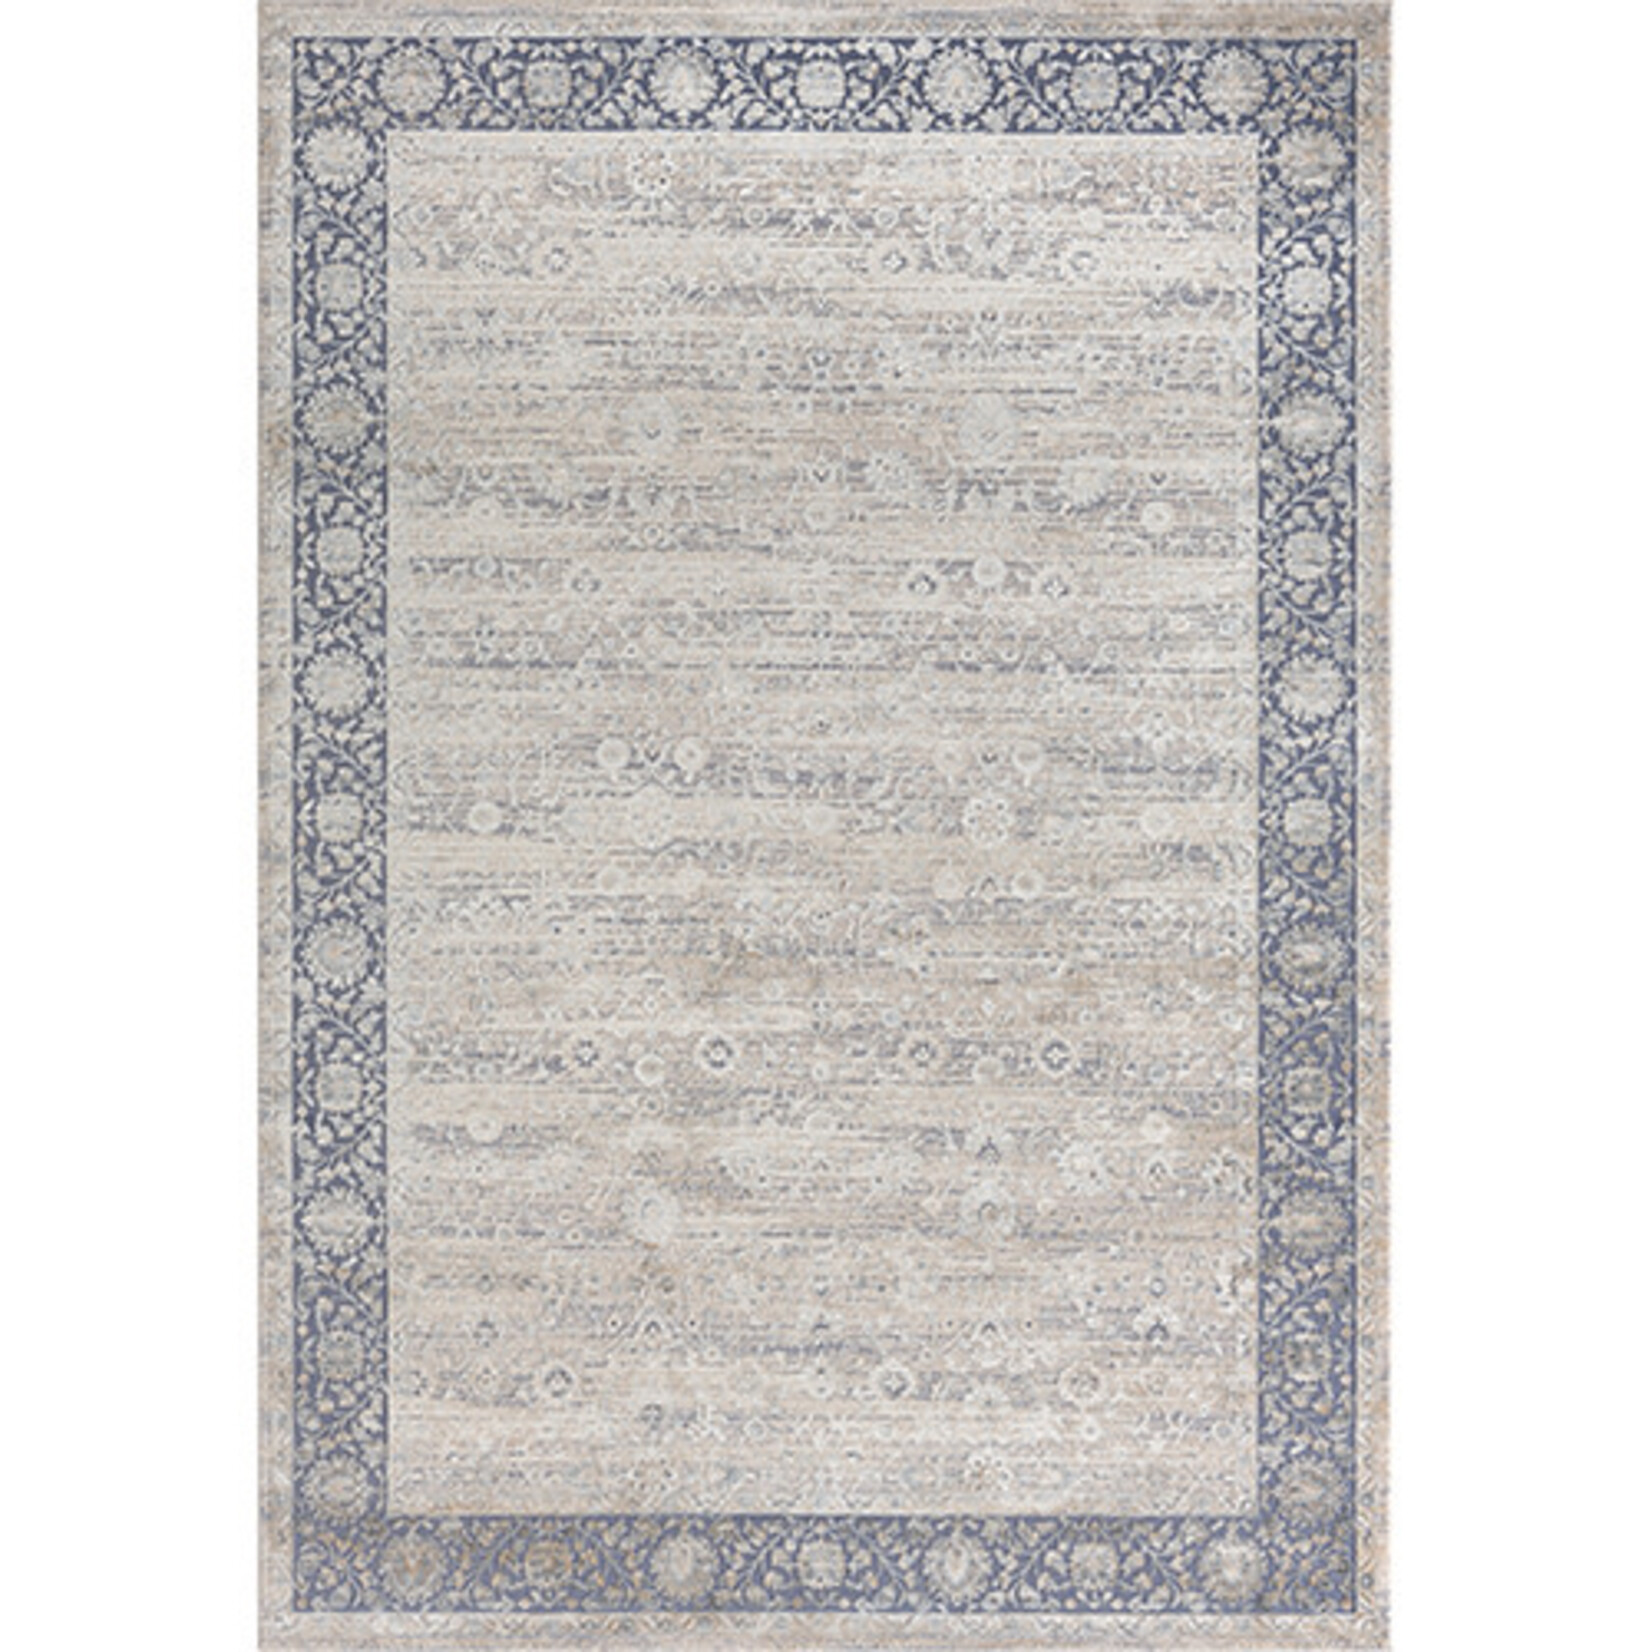 Outside The Box 9' x 12' Cheshire Viscose & Acrylic Blend Area Rug In Blue / Beige - 82406